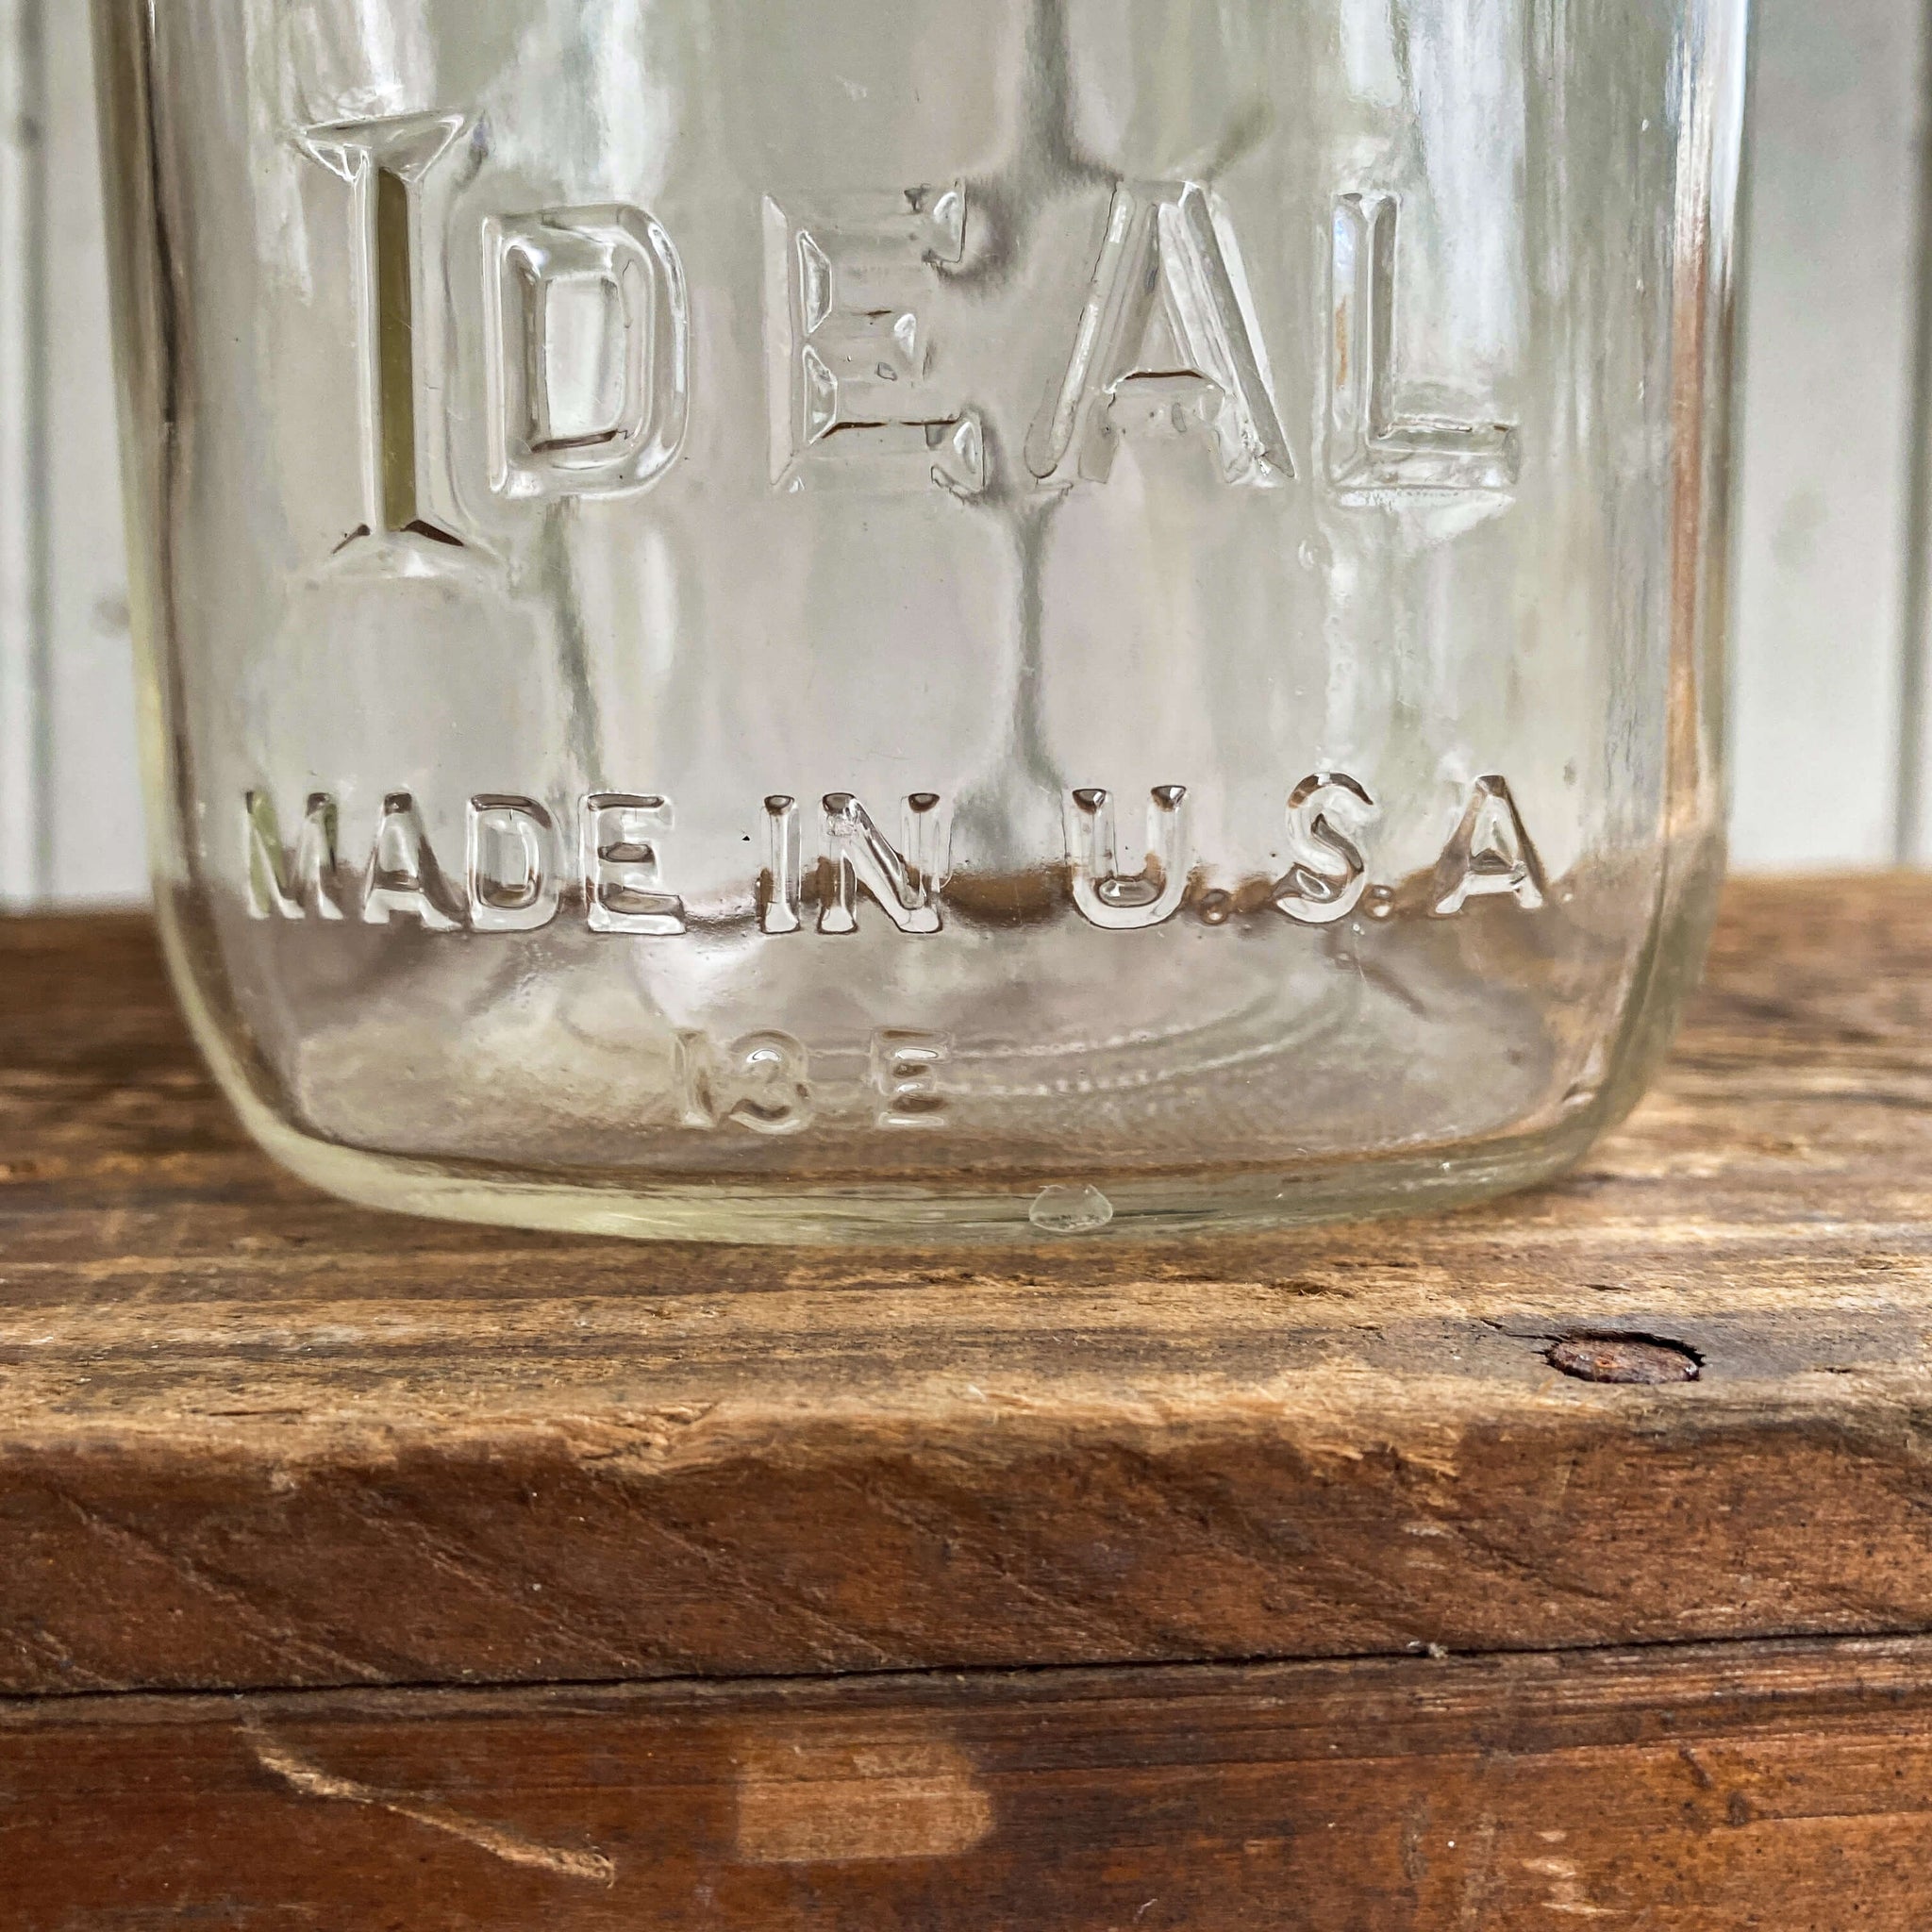 Antique Ball Ideal Canning Jars - Quart and Pint Sizes - 8 Jars Available circa 1923-1962